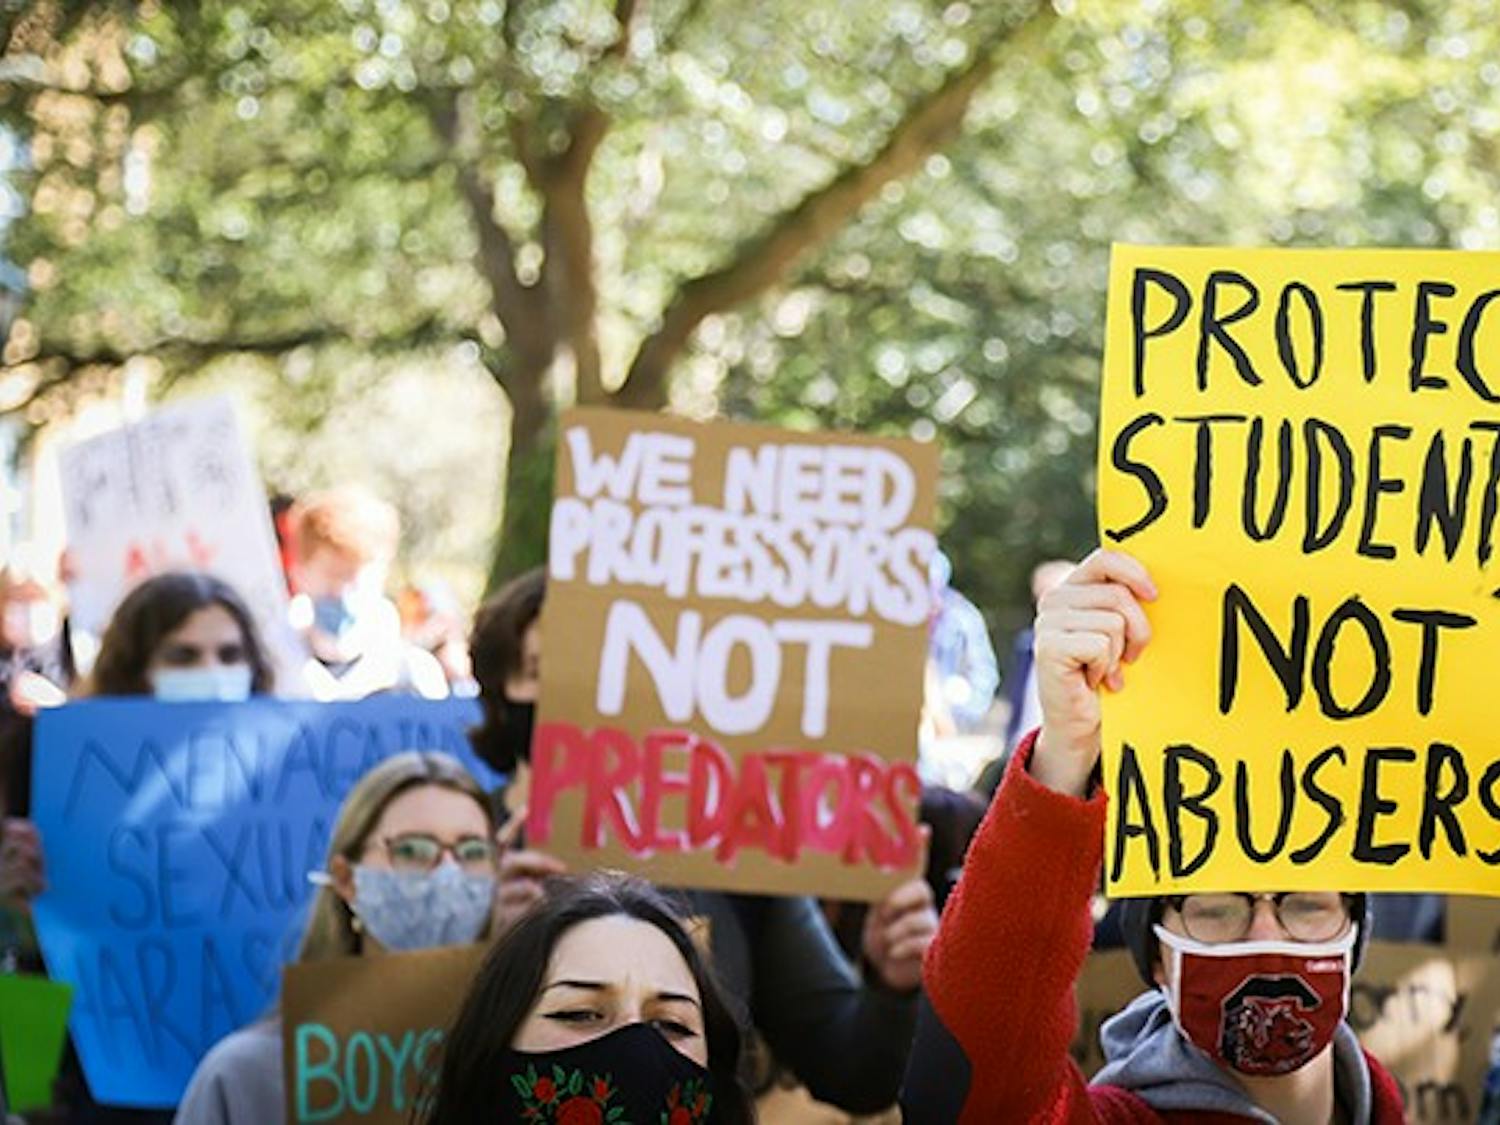 &nbsp;A marching protest attendee holds a sign that has the quote “PROTECT STUDENTS NOT ABUSERS” written on it as they march towards President Caslen’s house.&nbsp;